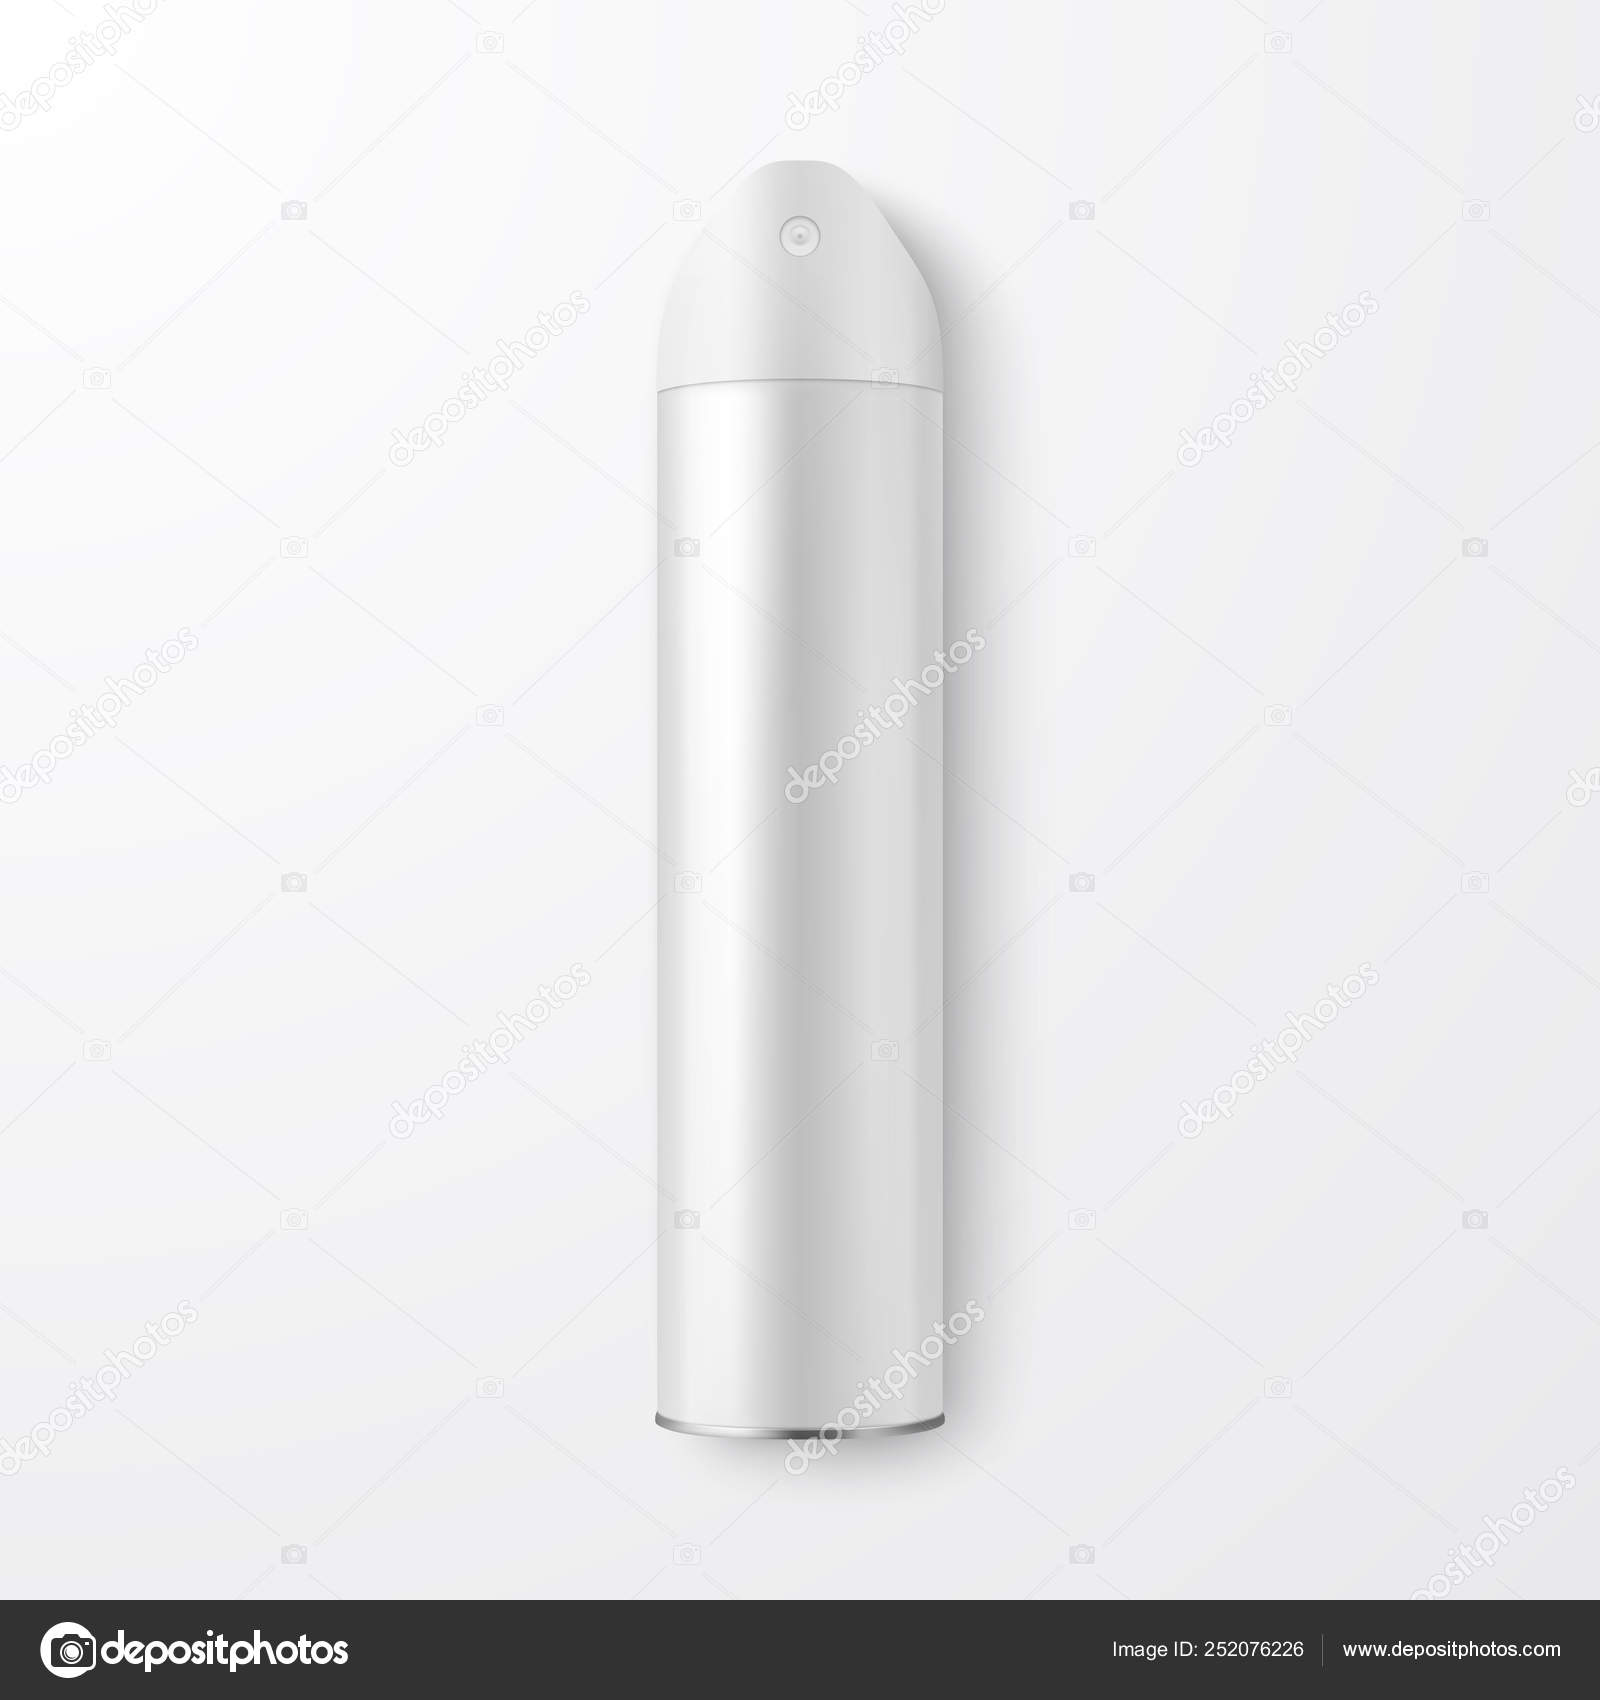 Download Vector 3d Realistic White Blank Spray Can Spray Air Freshener Bottle Closeup Isolated On White Background Design Template Of Sprayer Can For Mock Up Package Hairspray Deodorant Top View Vector Image